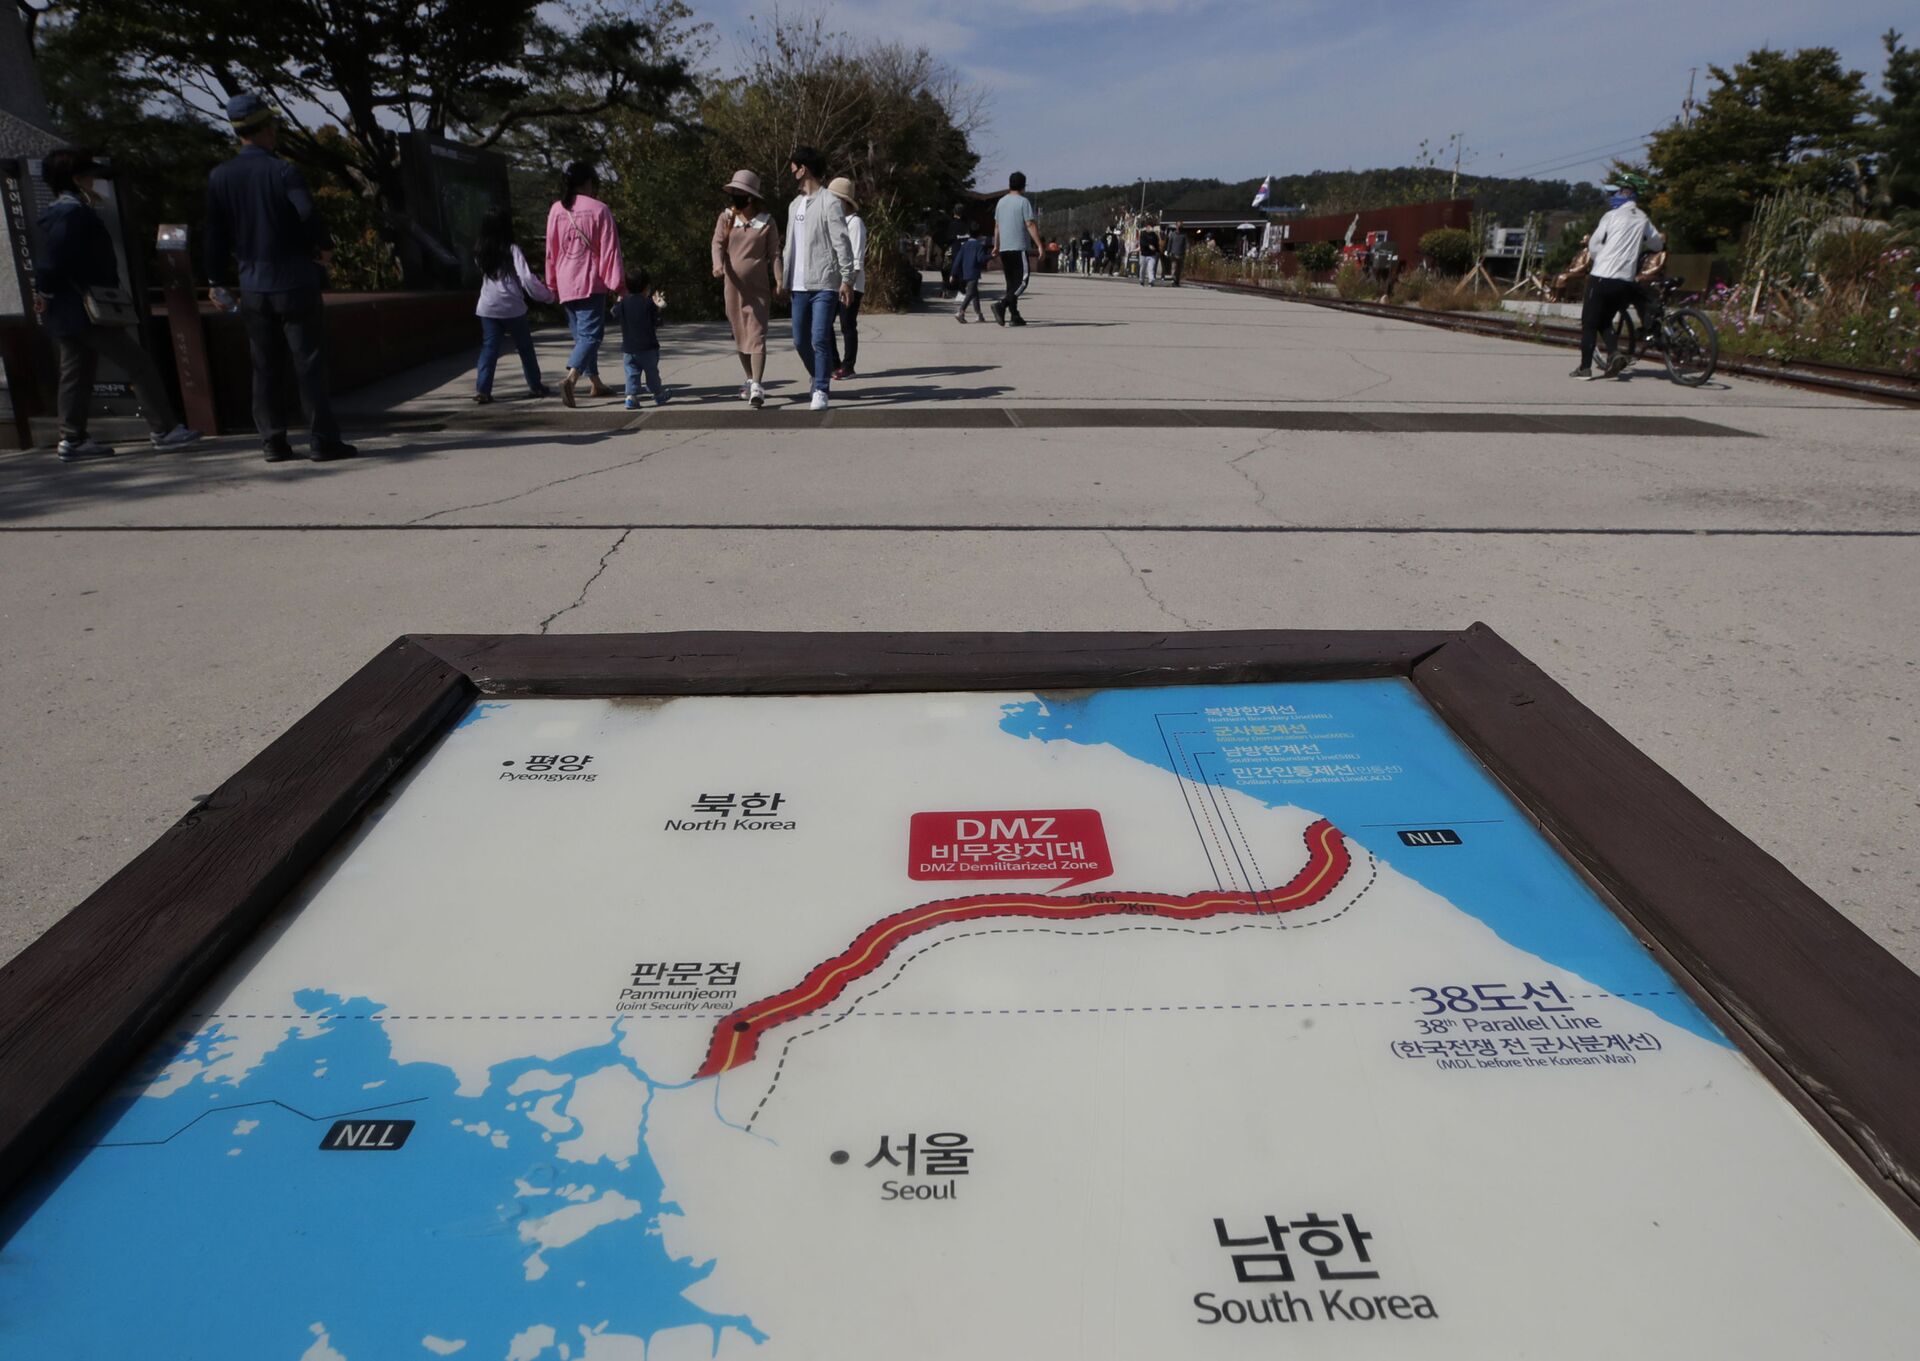 A map of two Koreas showing the Demilitarized Zone with North Korea's capital Pyongyang and South Korea's capital Seoul is seen at the Imjingak Pavilion in Paju, South Korea, Sunday, Oct. 11, 2020 - Sputnik International, 1920, 07.09.2021